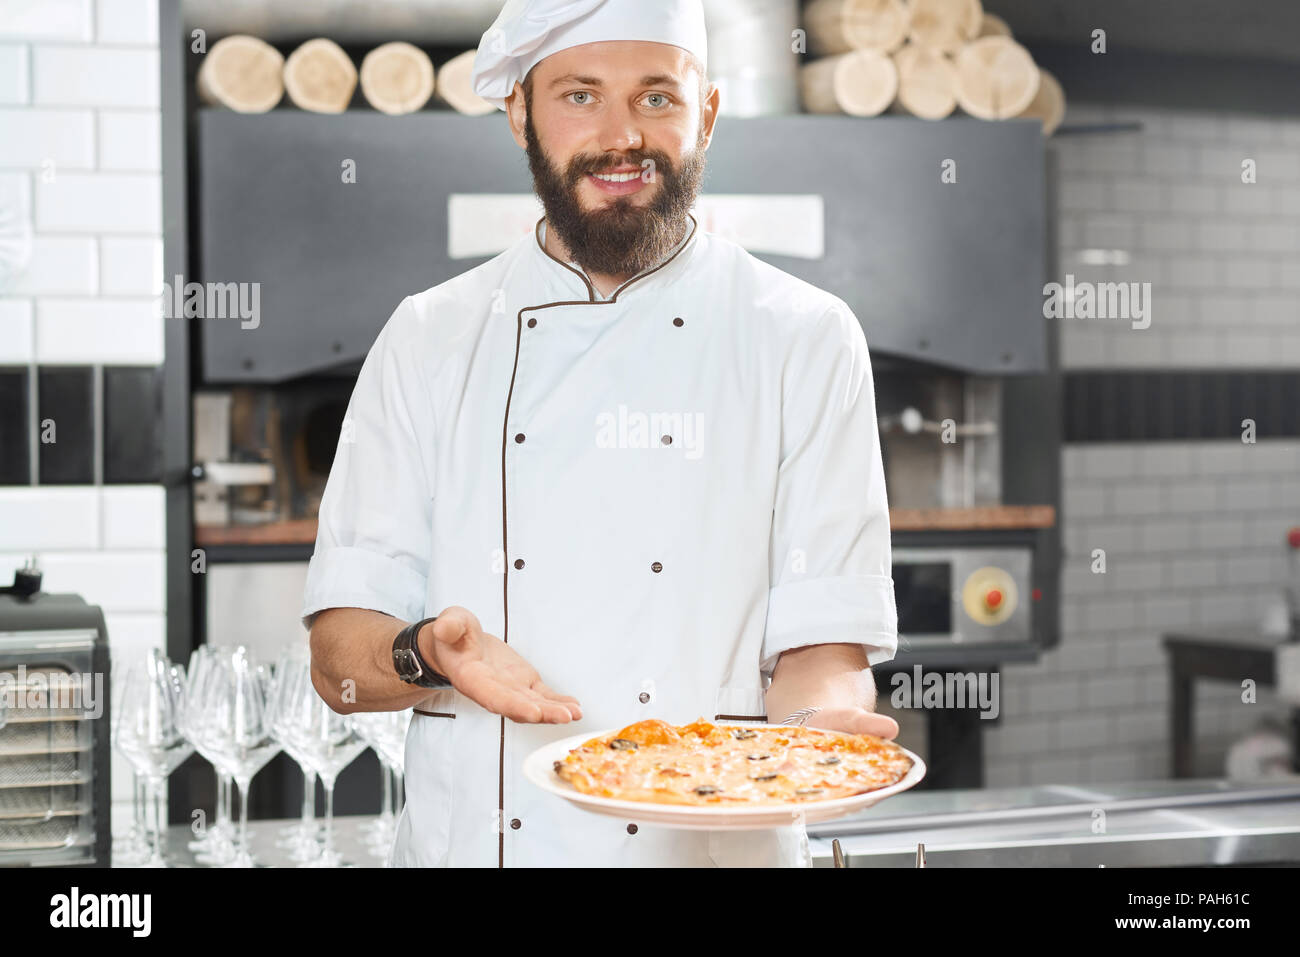 Smiling pizzaiolo holding fresh baked mouthwatering, delicious pizza. Wearing white chef's tunic working on restaurant kitchen with oven, wooden timbers, wine glasses set standing on background. Stock Photo